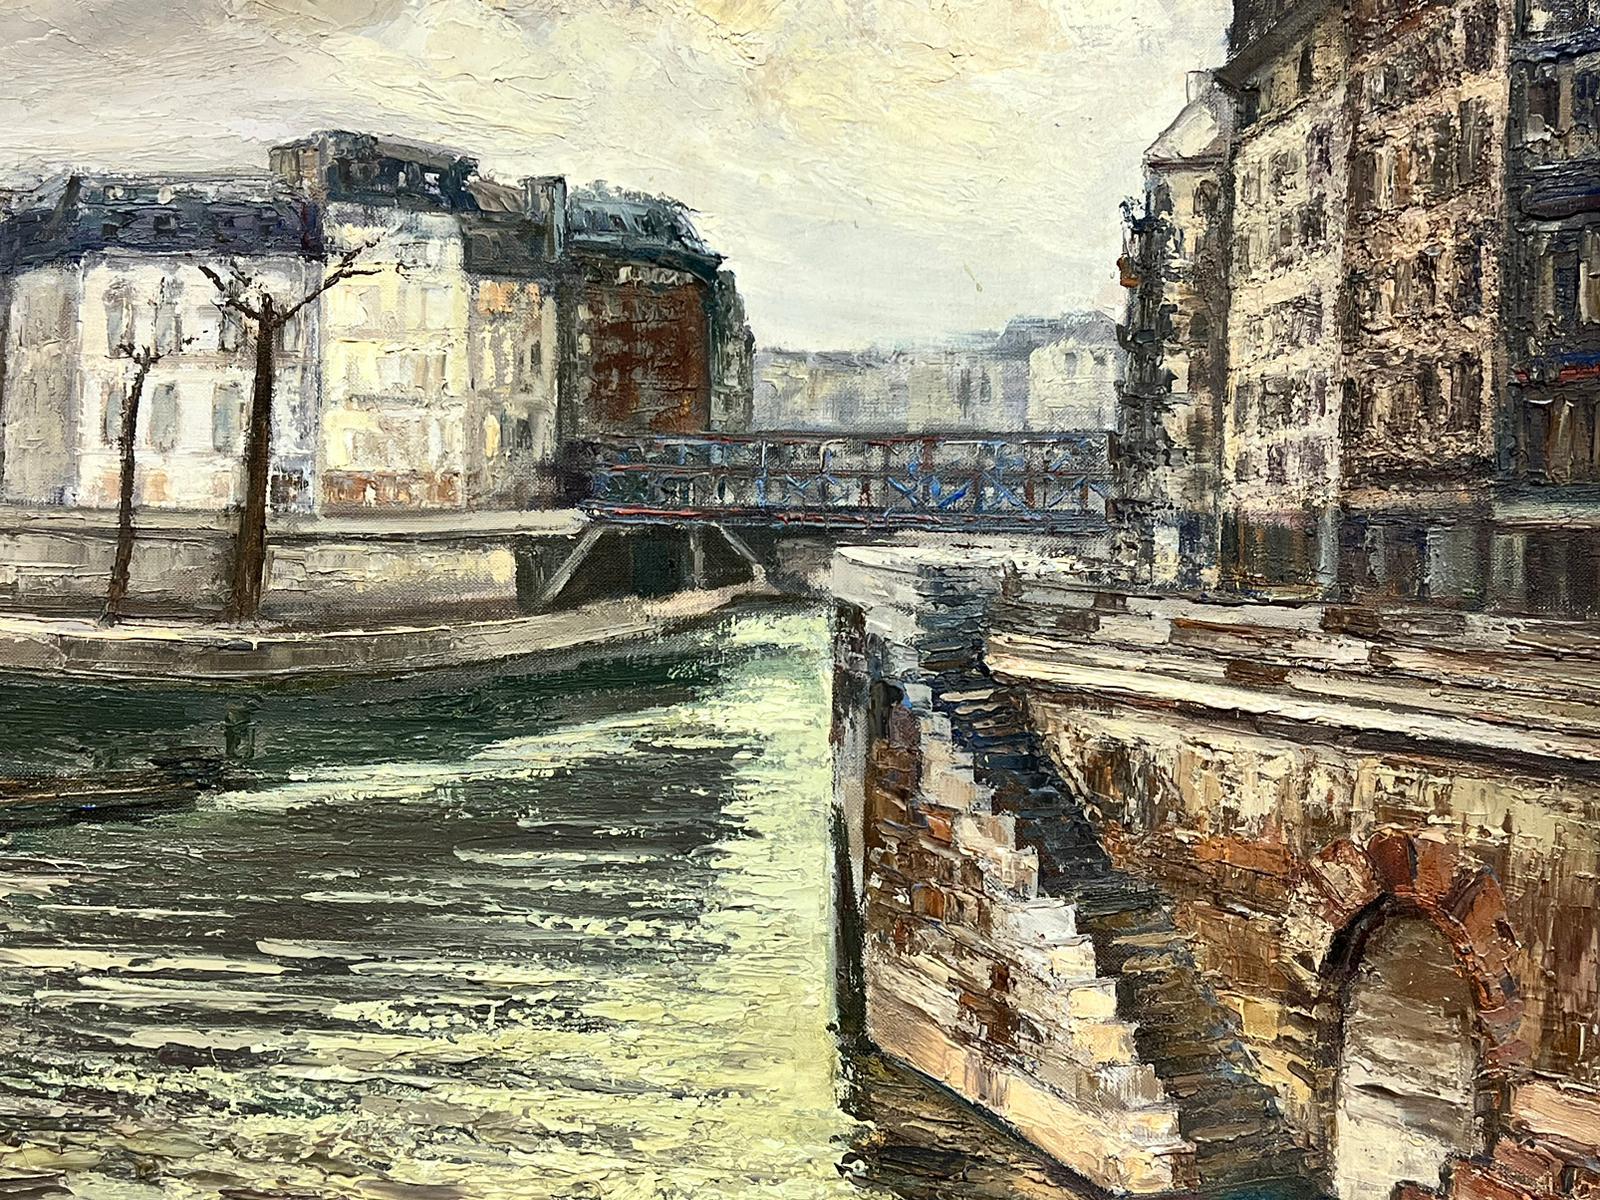 Paris
by Josine Vignon (French 1922-2022)
signed 
oil painting on canvas, framed
framed: 31 x 35 inches
canvas: 25 x 29 inches

Colors: Green colors, beige, blue and grey

Very good condition

Provenance: from the artists estate, France

Josine